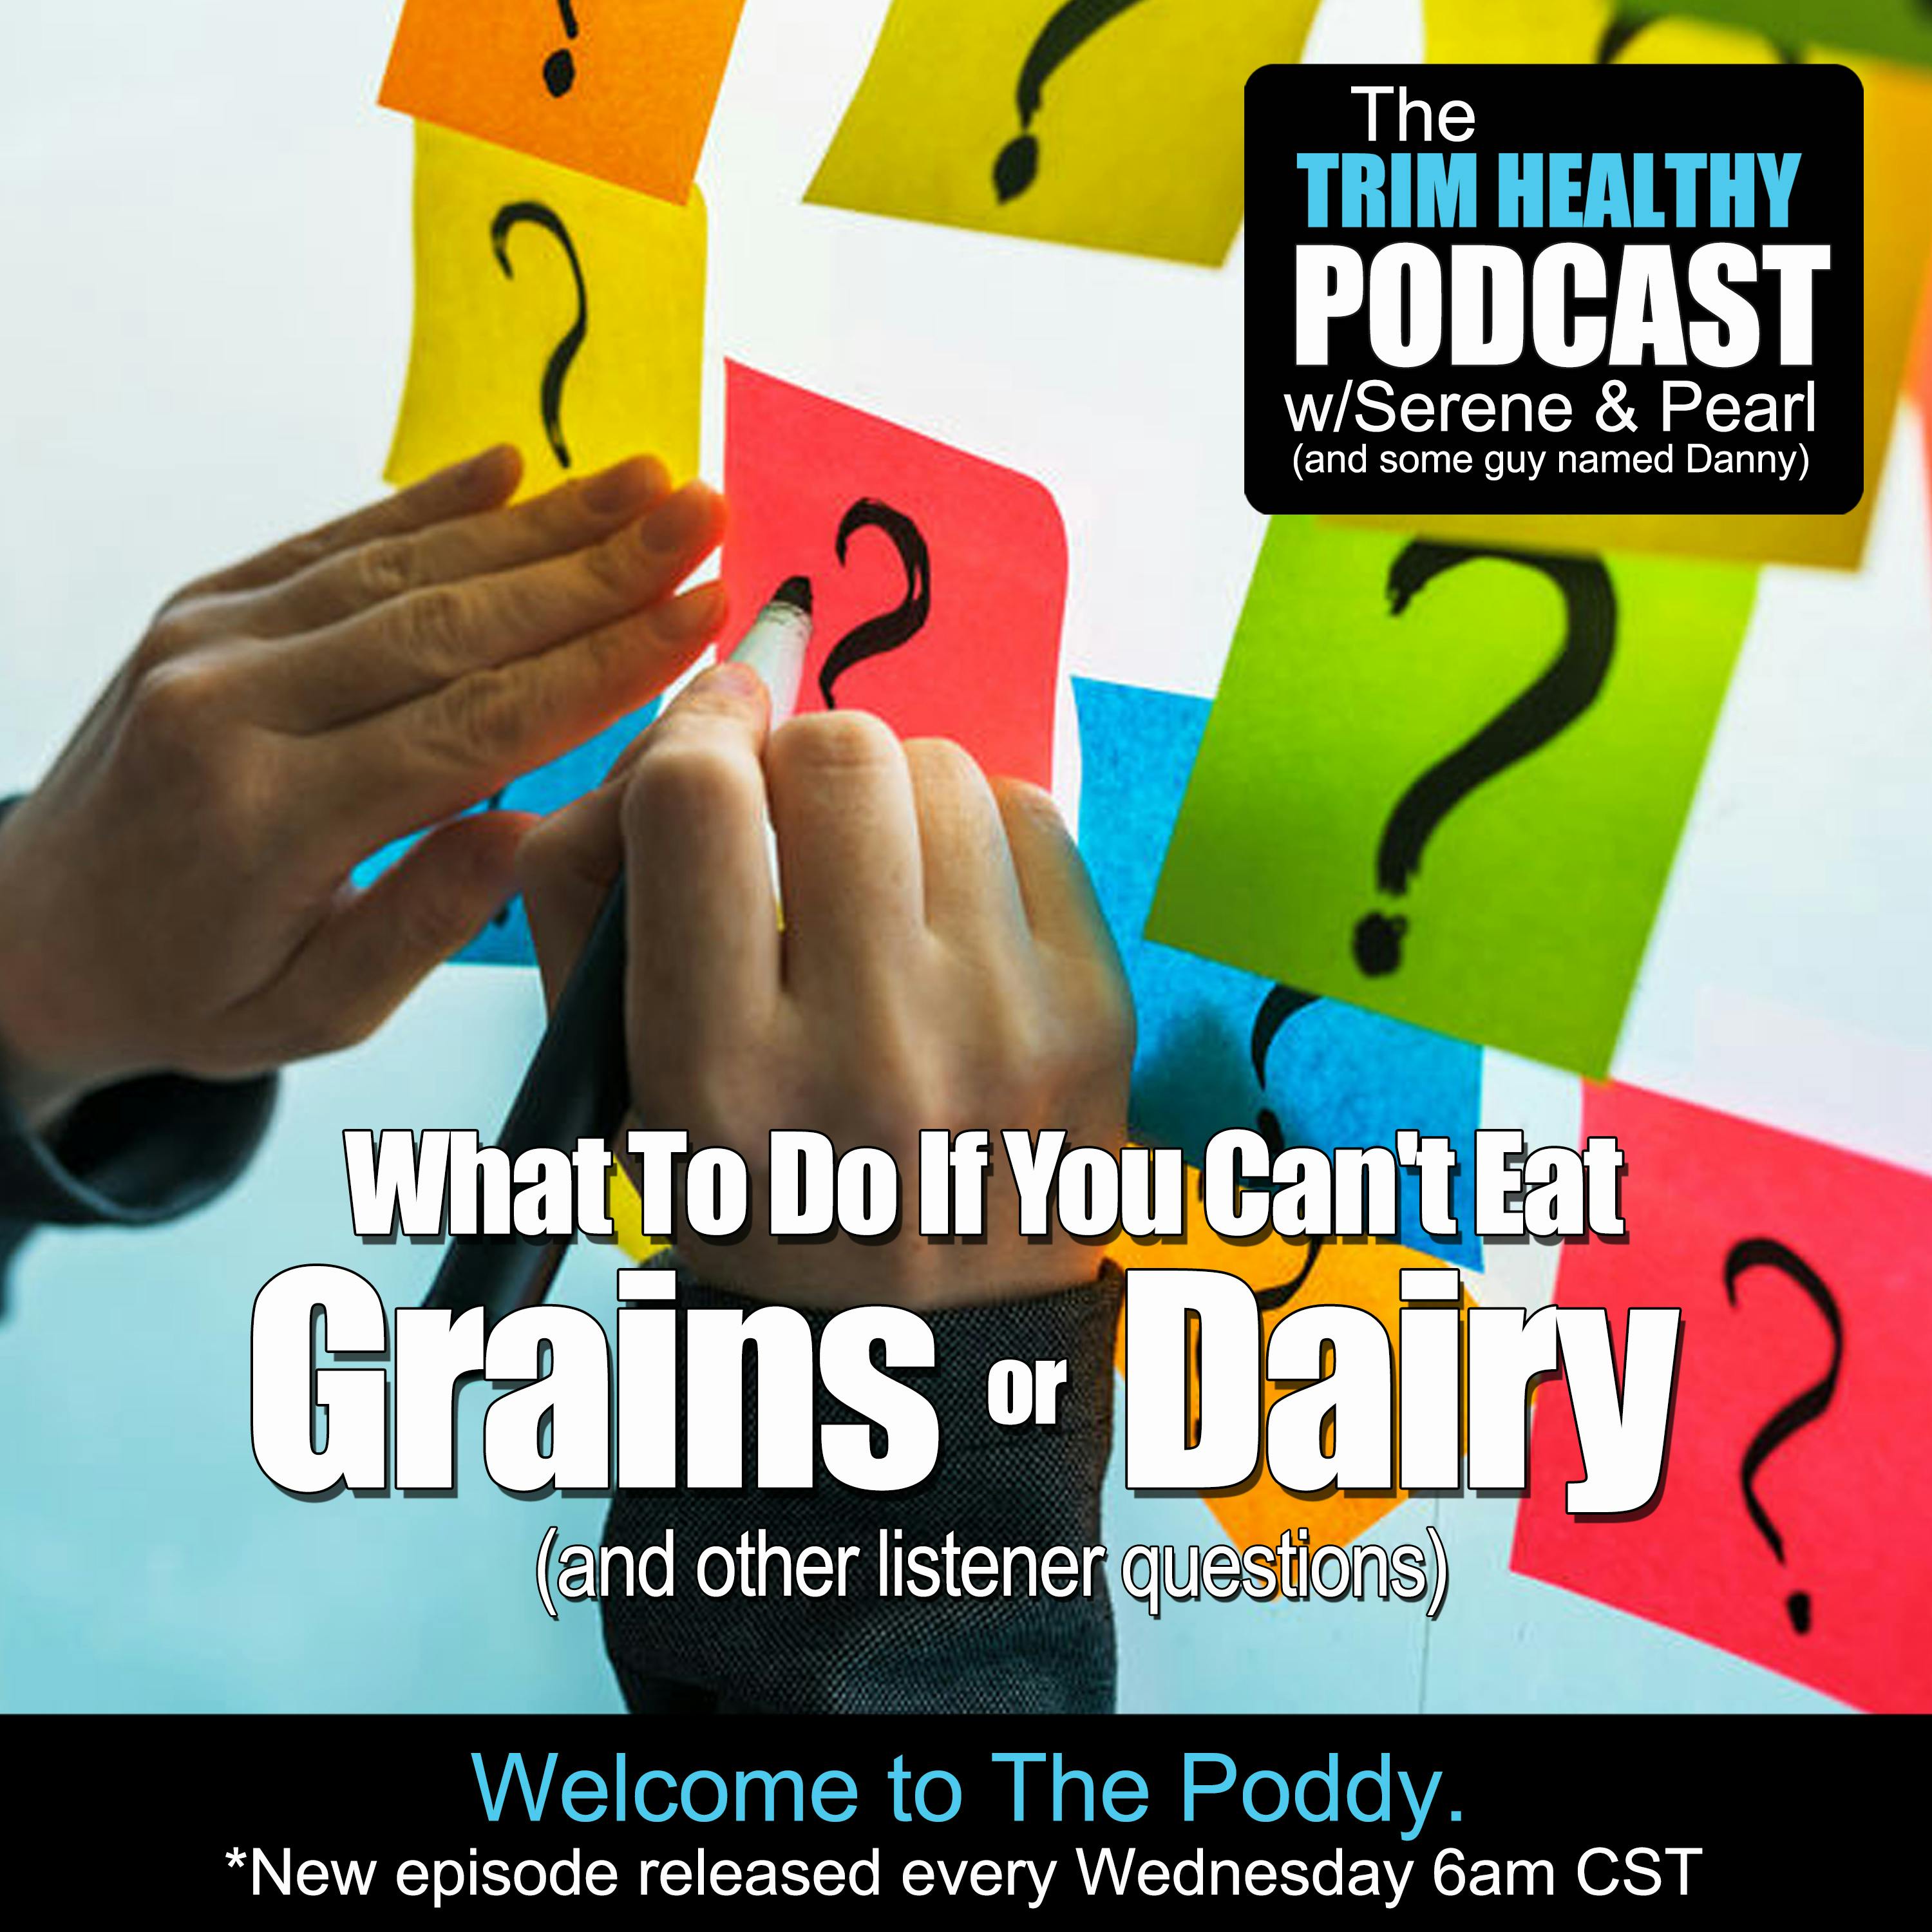 Ep 225: What To Do If You Can't Eat Grains Or Dairy? (and other listener questions)